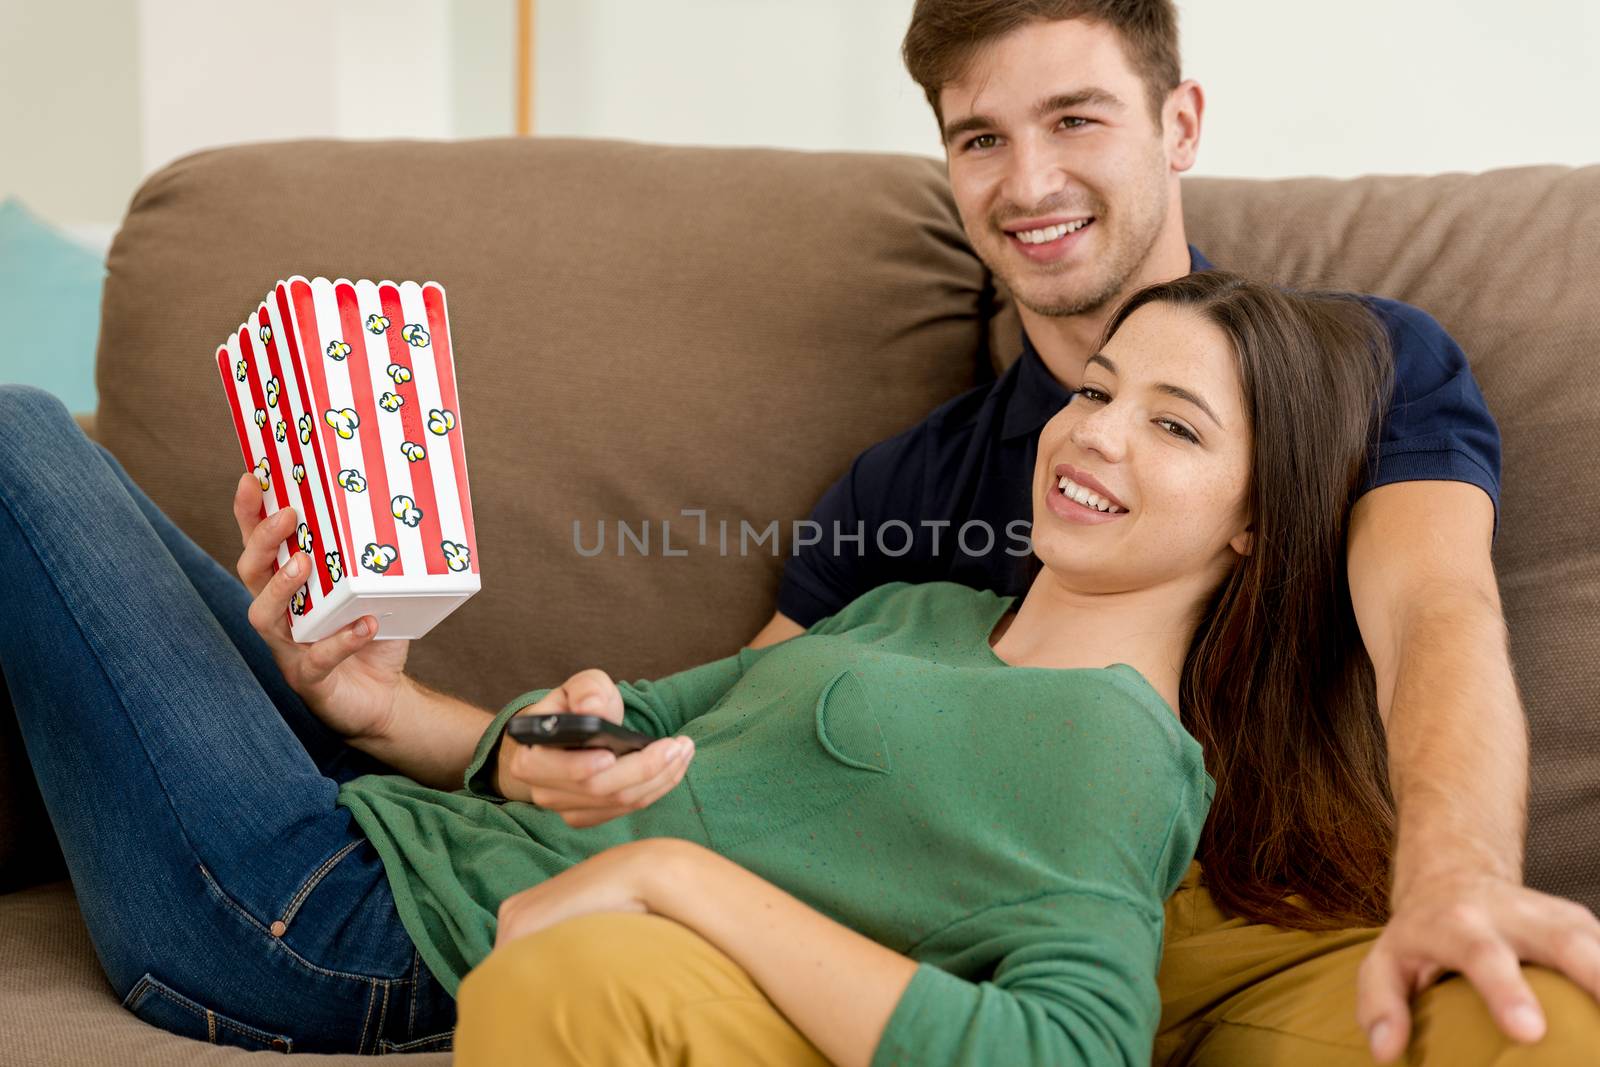 Young couple on the sofa and eating popcorns